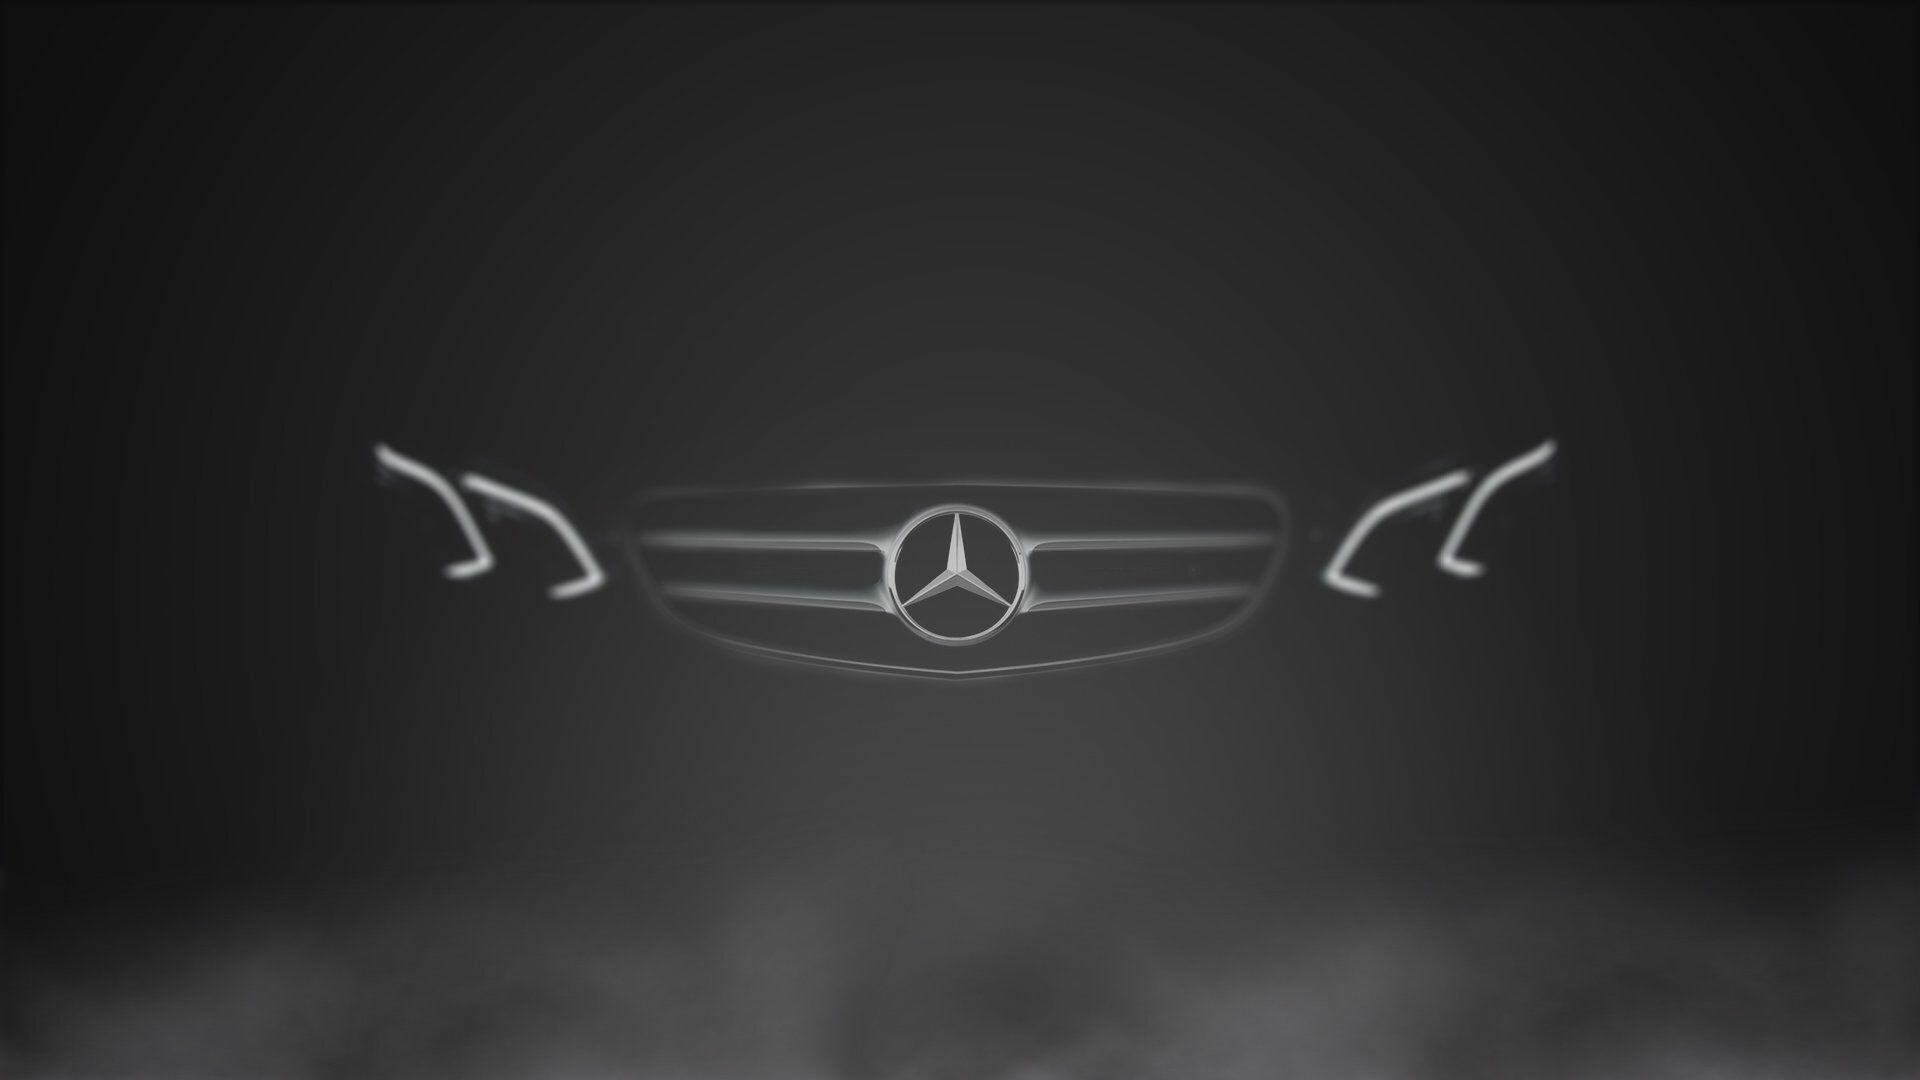 Mercedes-Benz: Produces B-Class and CLA-Class at the plant in Kecskemet, Hungary. 1920x1080 Full HD Wallpaper.